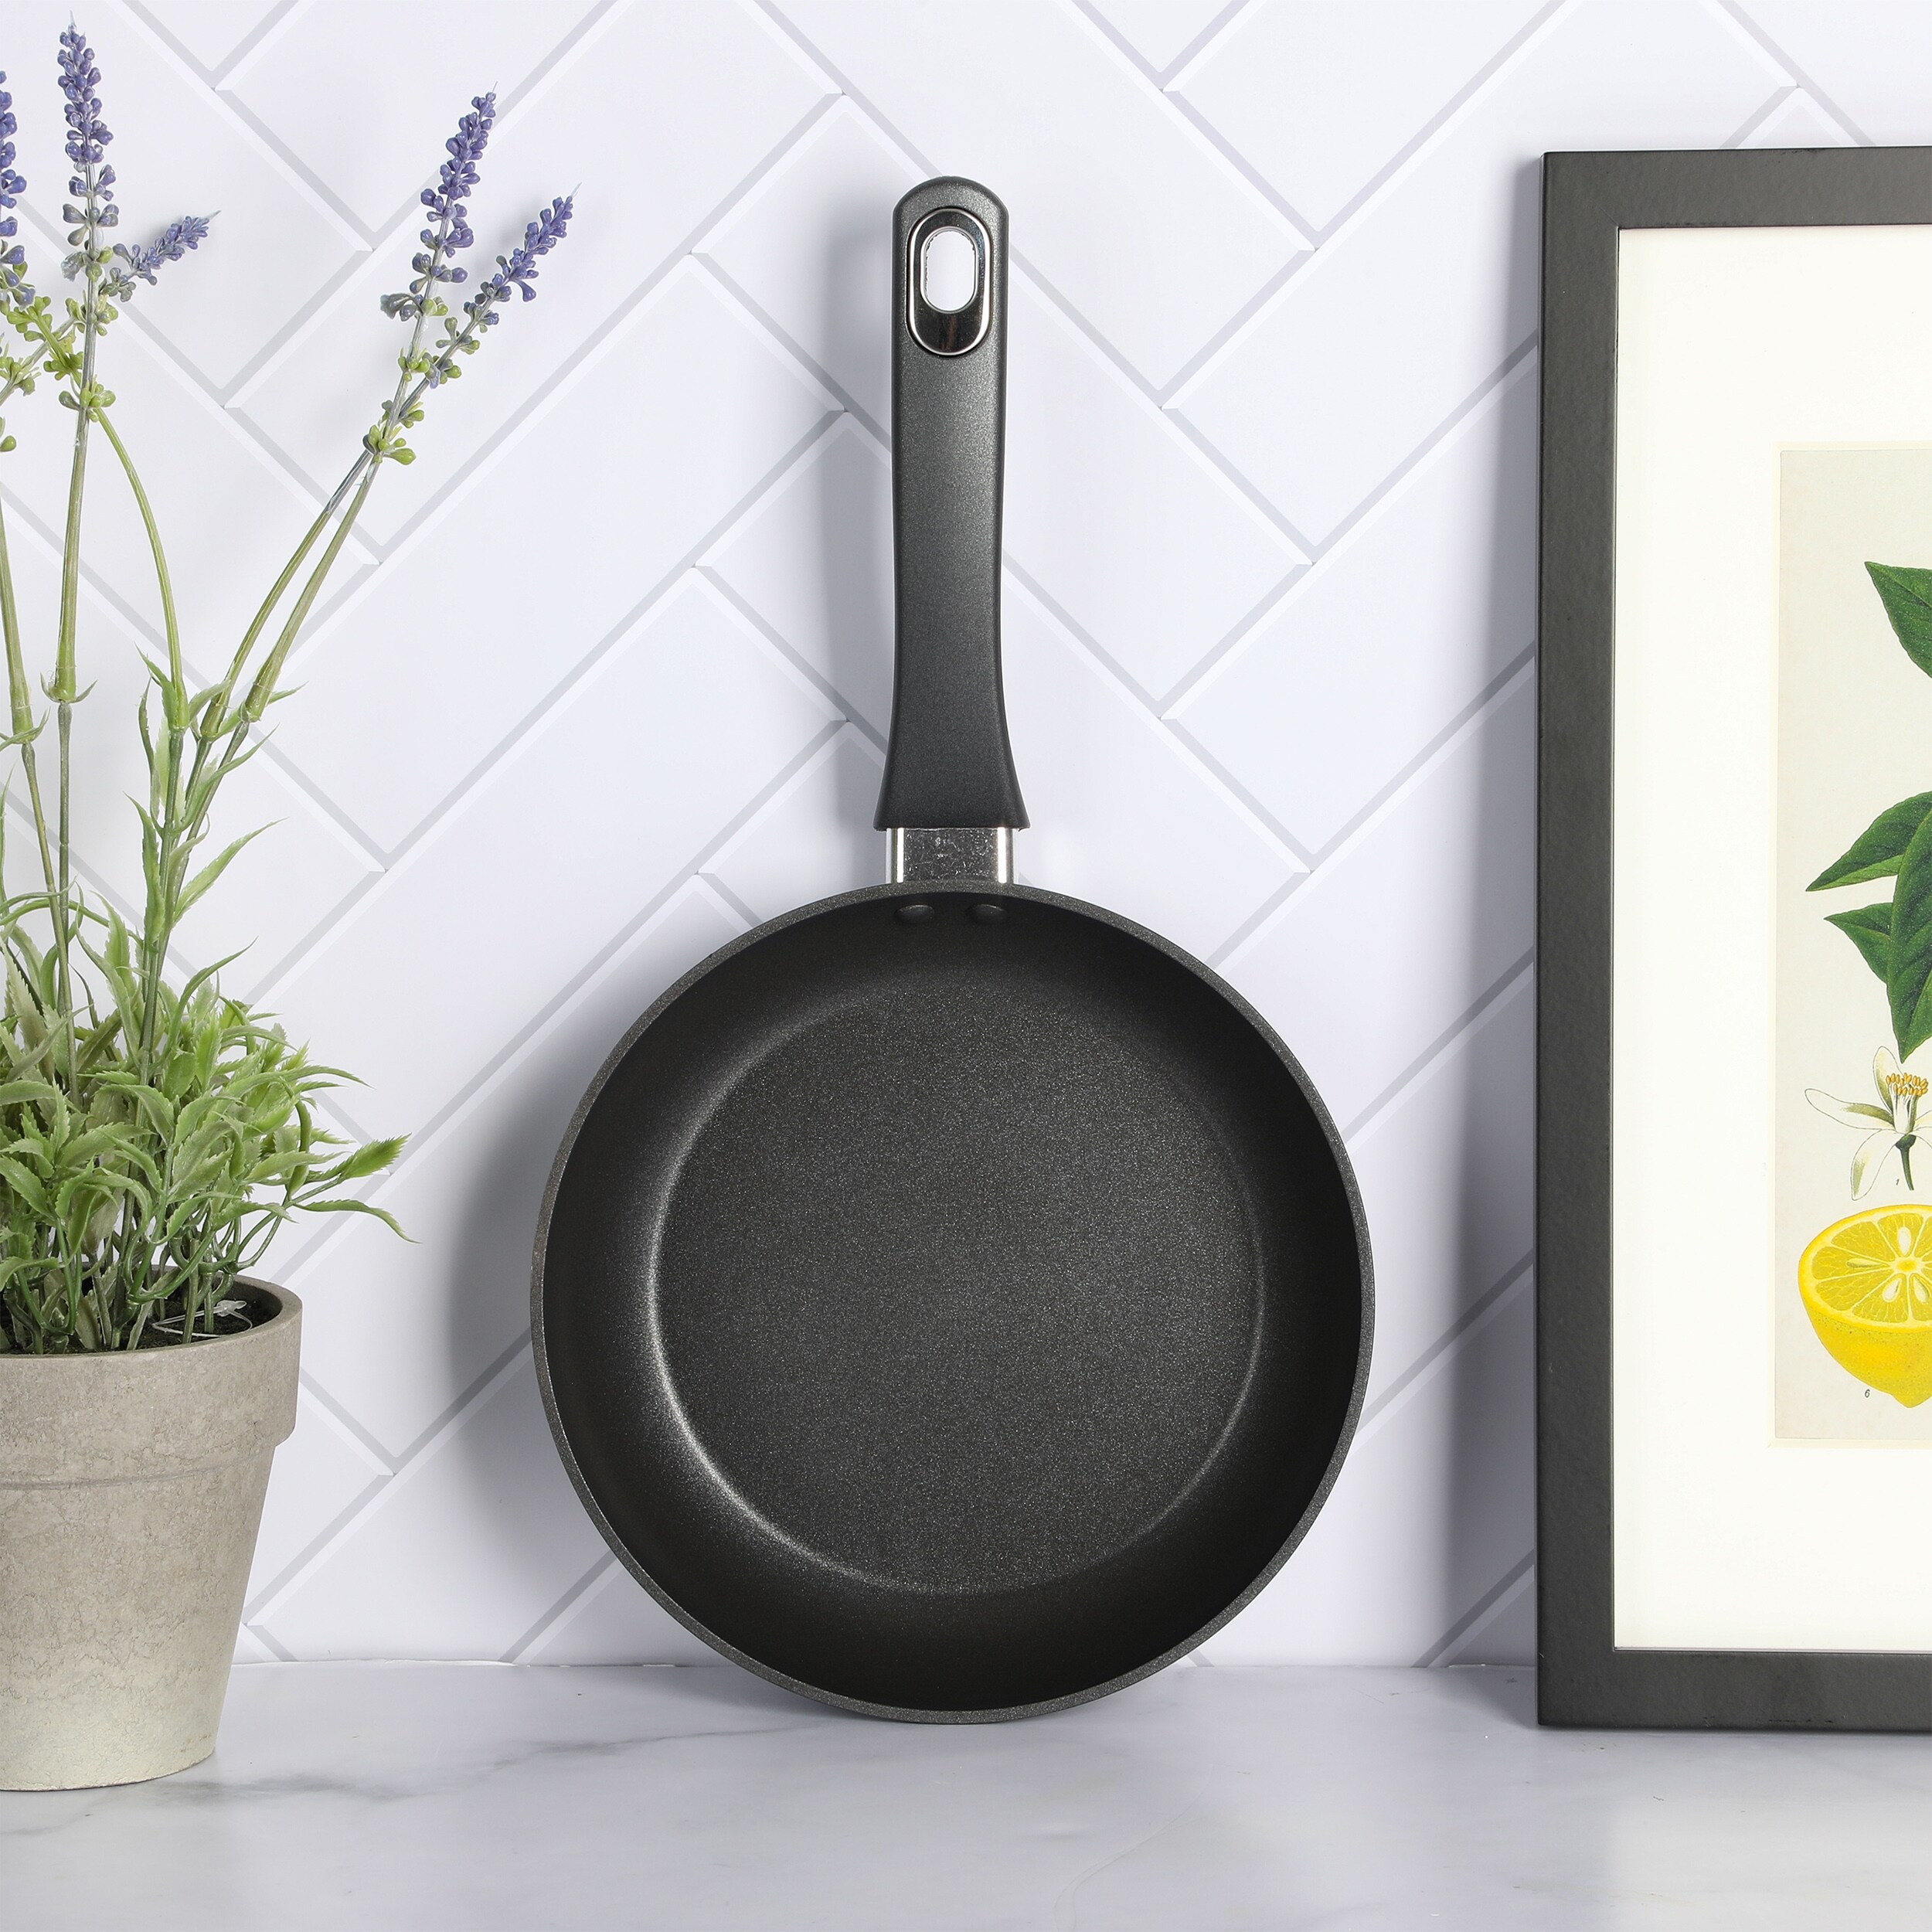 https://ak1.ostkcdn.com/images/products/is/images/direct/25ca09f5c8c9d0d18c27e5fa2f0d50737569fa38/Martha-Stewart-Everyday-Bowcroft-Aluminum-Nonstick-Frying-Pan.jpg